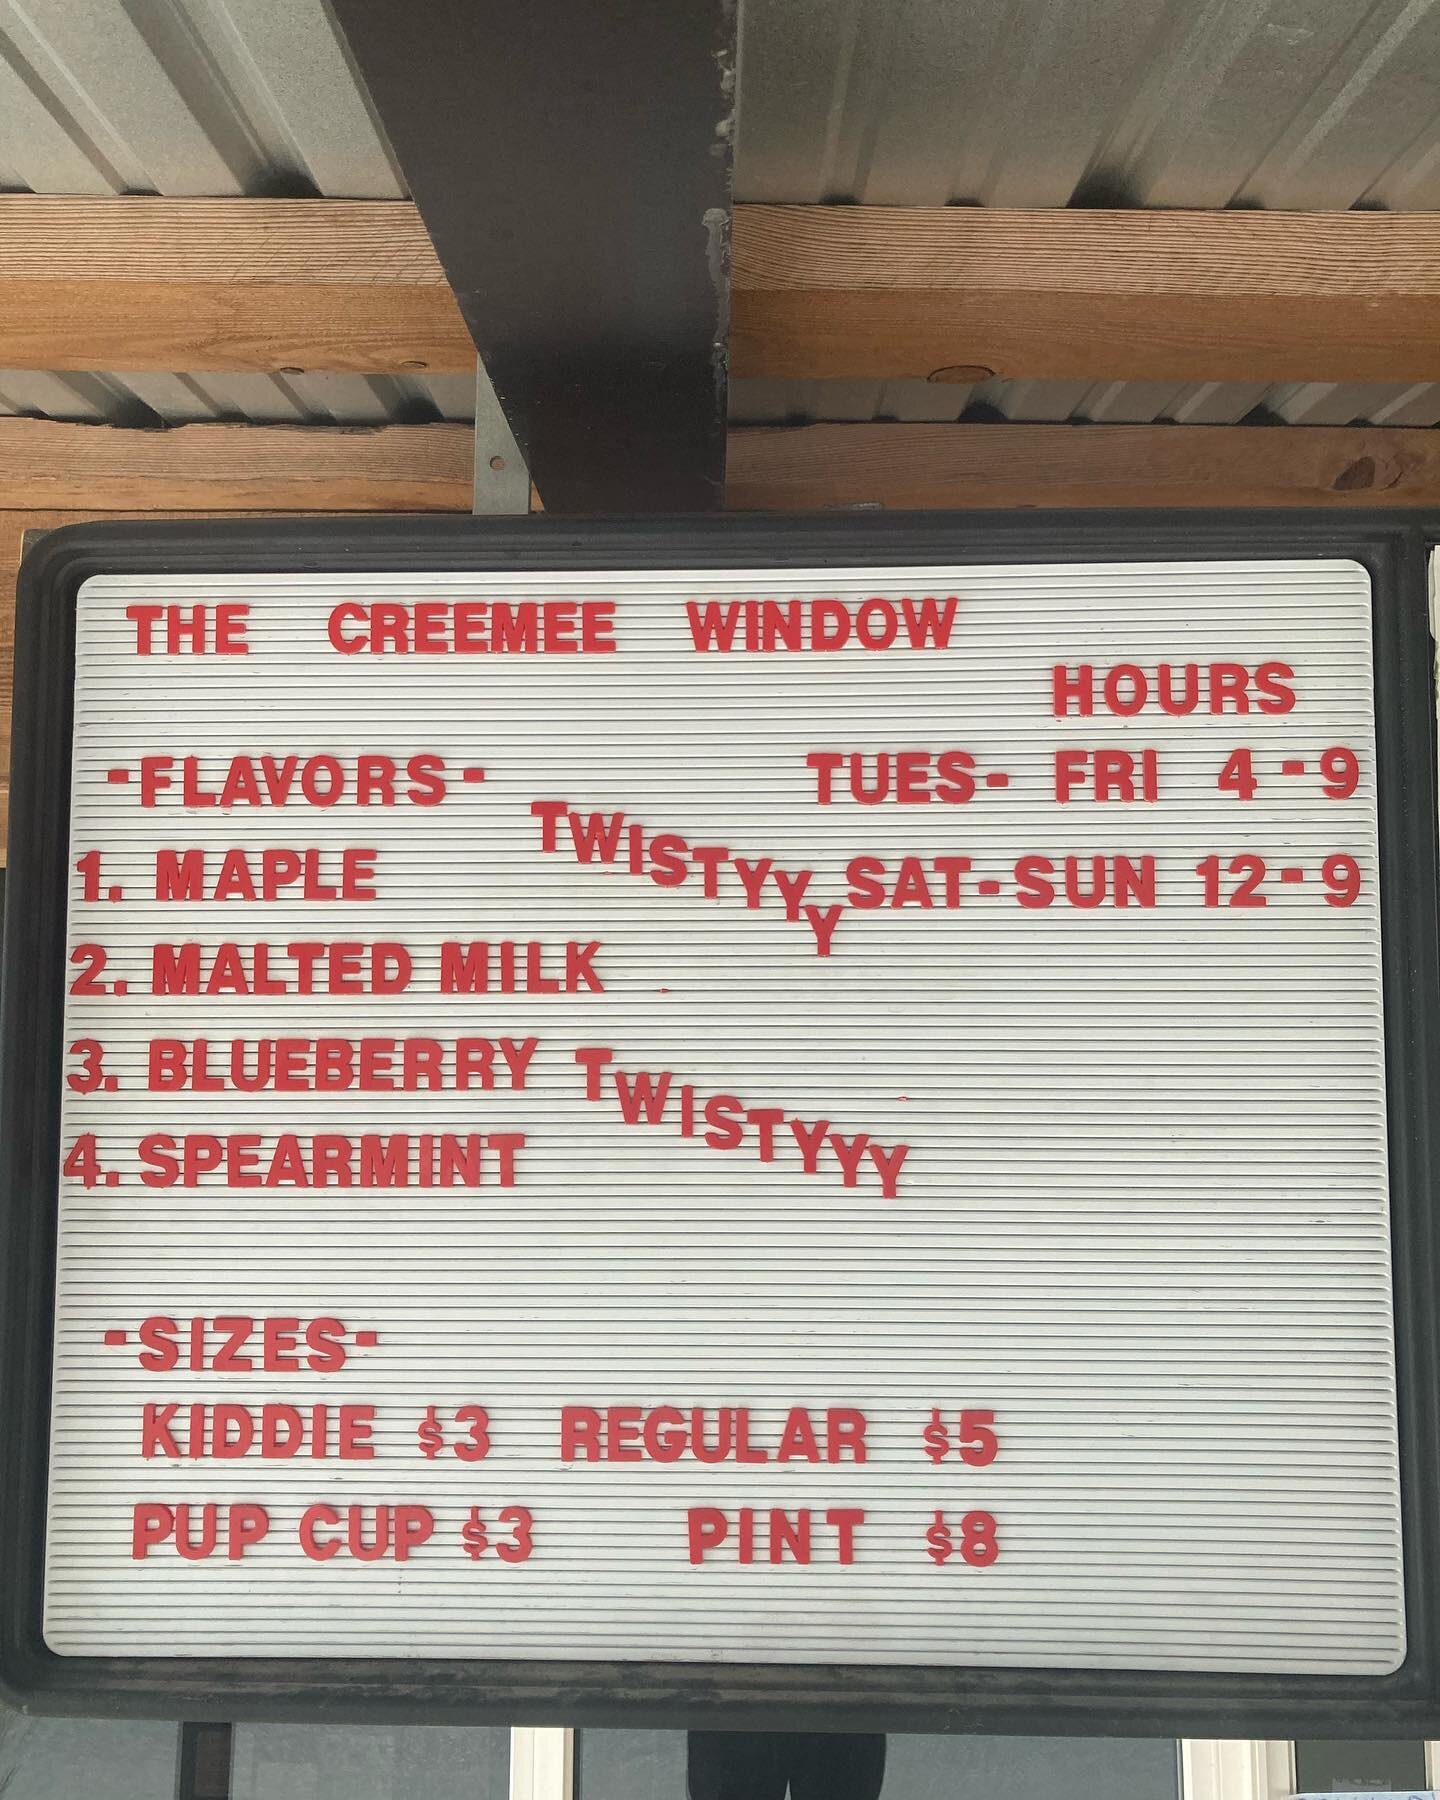 At this point just ignore the rain. This week we are featuring Maple paired with Malted Milk and Owl&rsquo;s Head  Farm Blueberry paired with local spearmint. Ivan is slinging from 4 to 9. 🍦❤️🌈